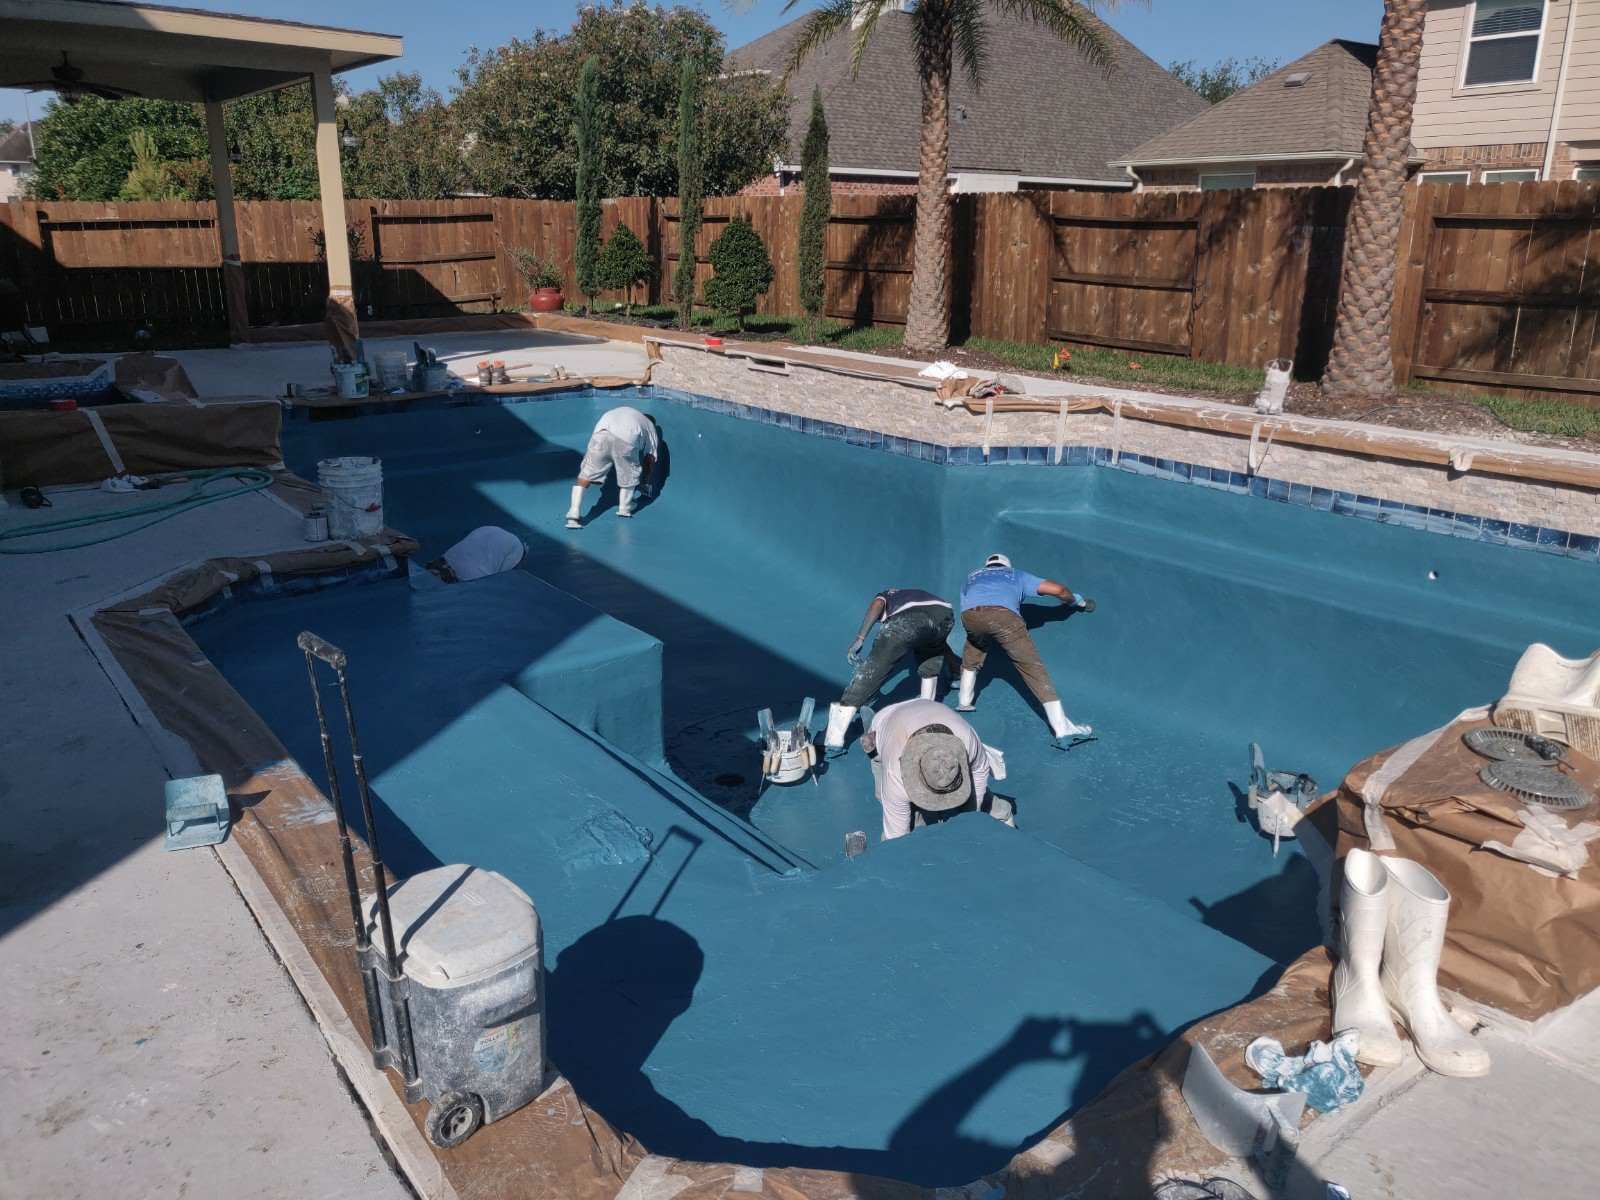 Get Your Pool Ready For Summer With A Pool Remodel